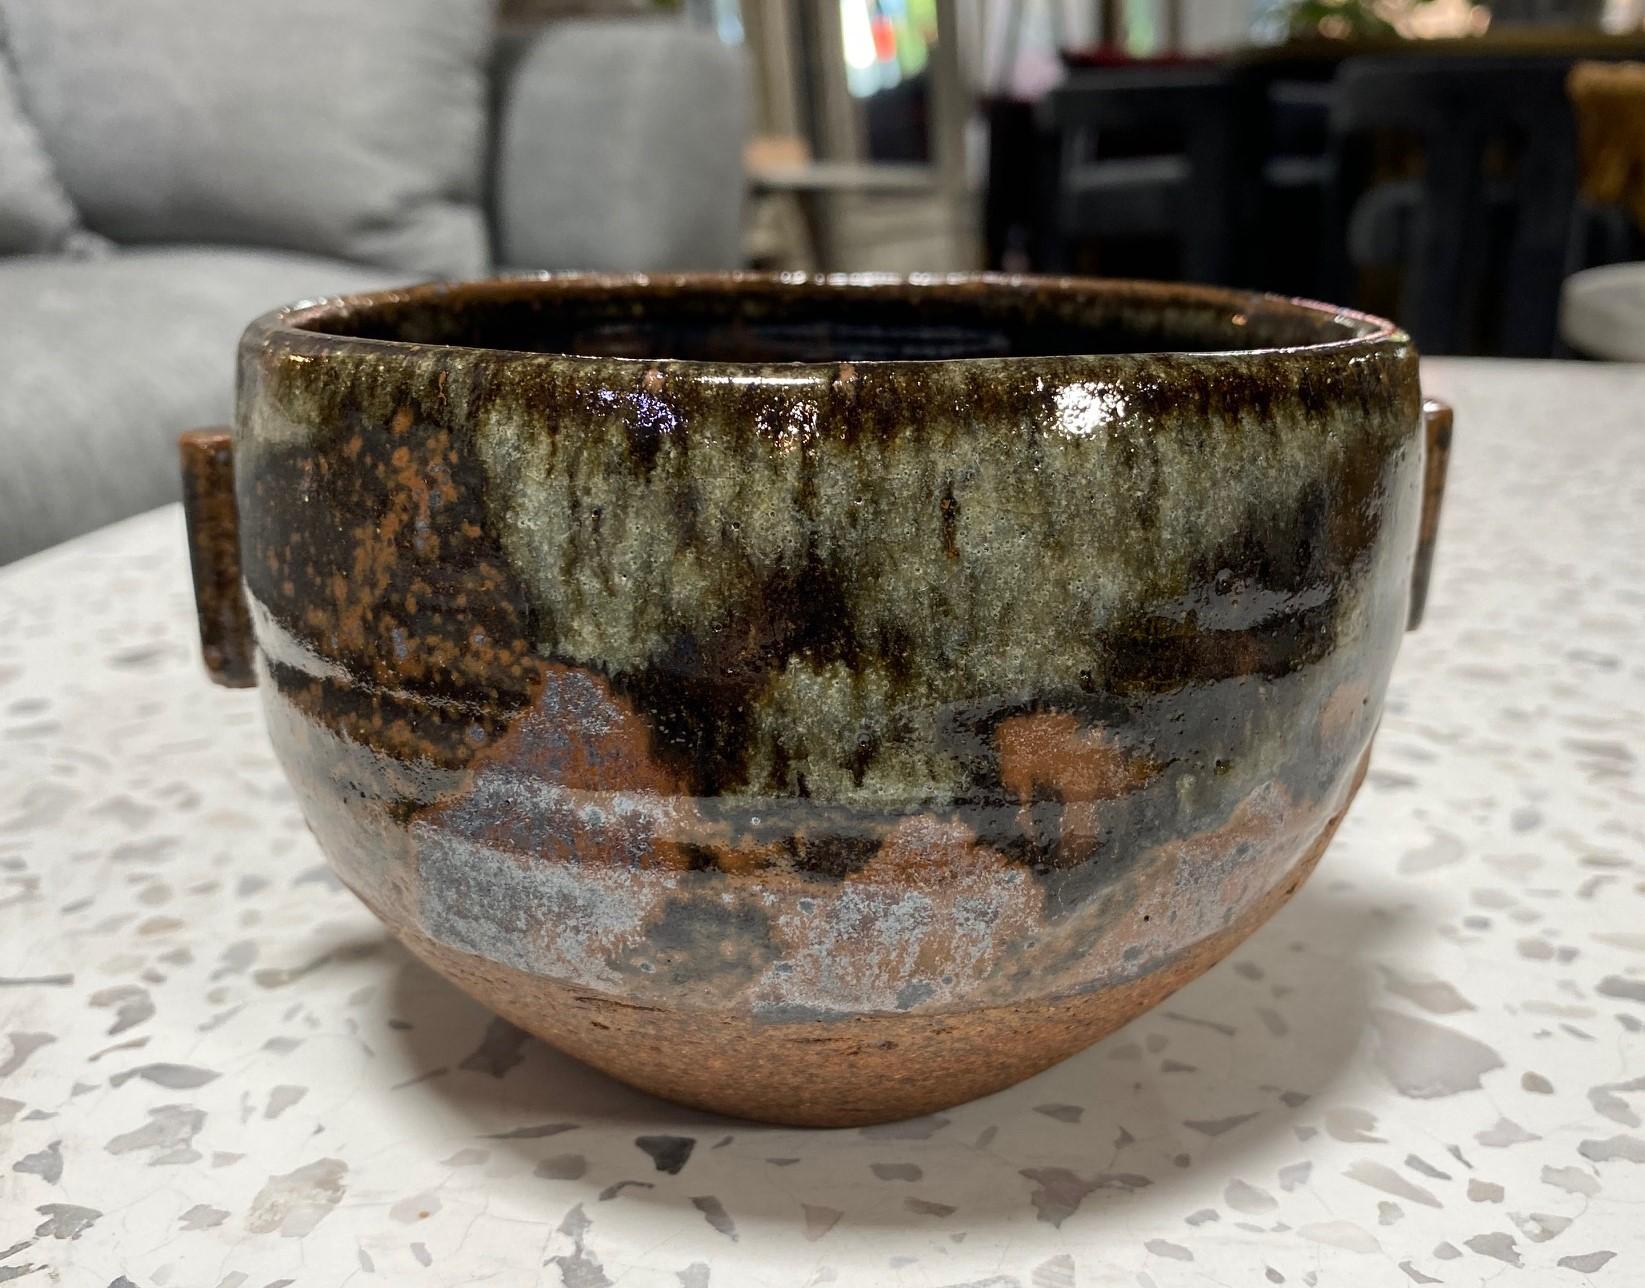 A wonderfully designed and glazed Japanese Mingei style Chawan tea ceremony bowl with ears by esteemed American born/ British potter Janet Leach, wife of famed master ceramicist Bernard Leach (the Father of British Studio Pottery and founder of